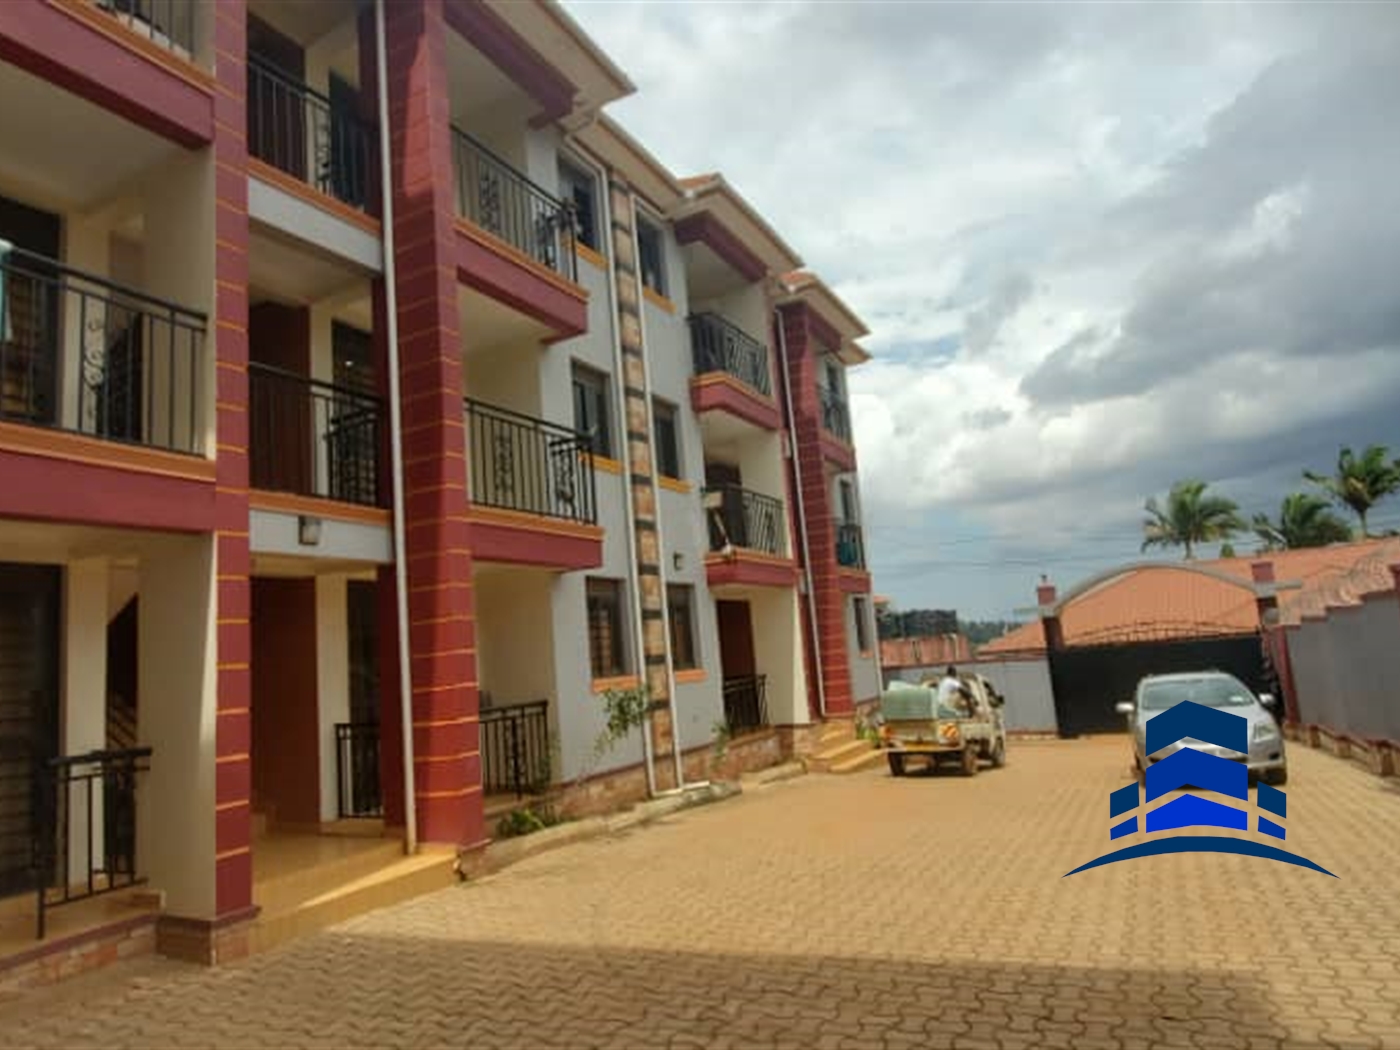 Apartment block for sale in Kisaasi Wakiso